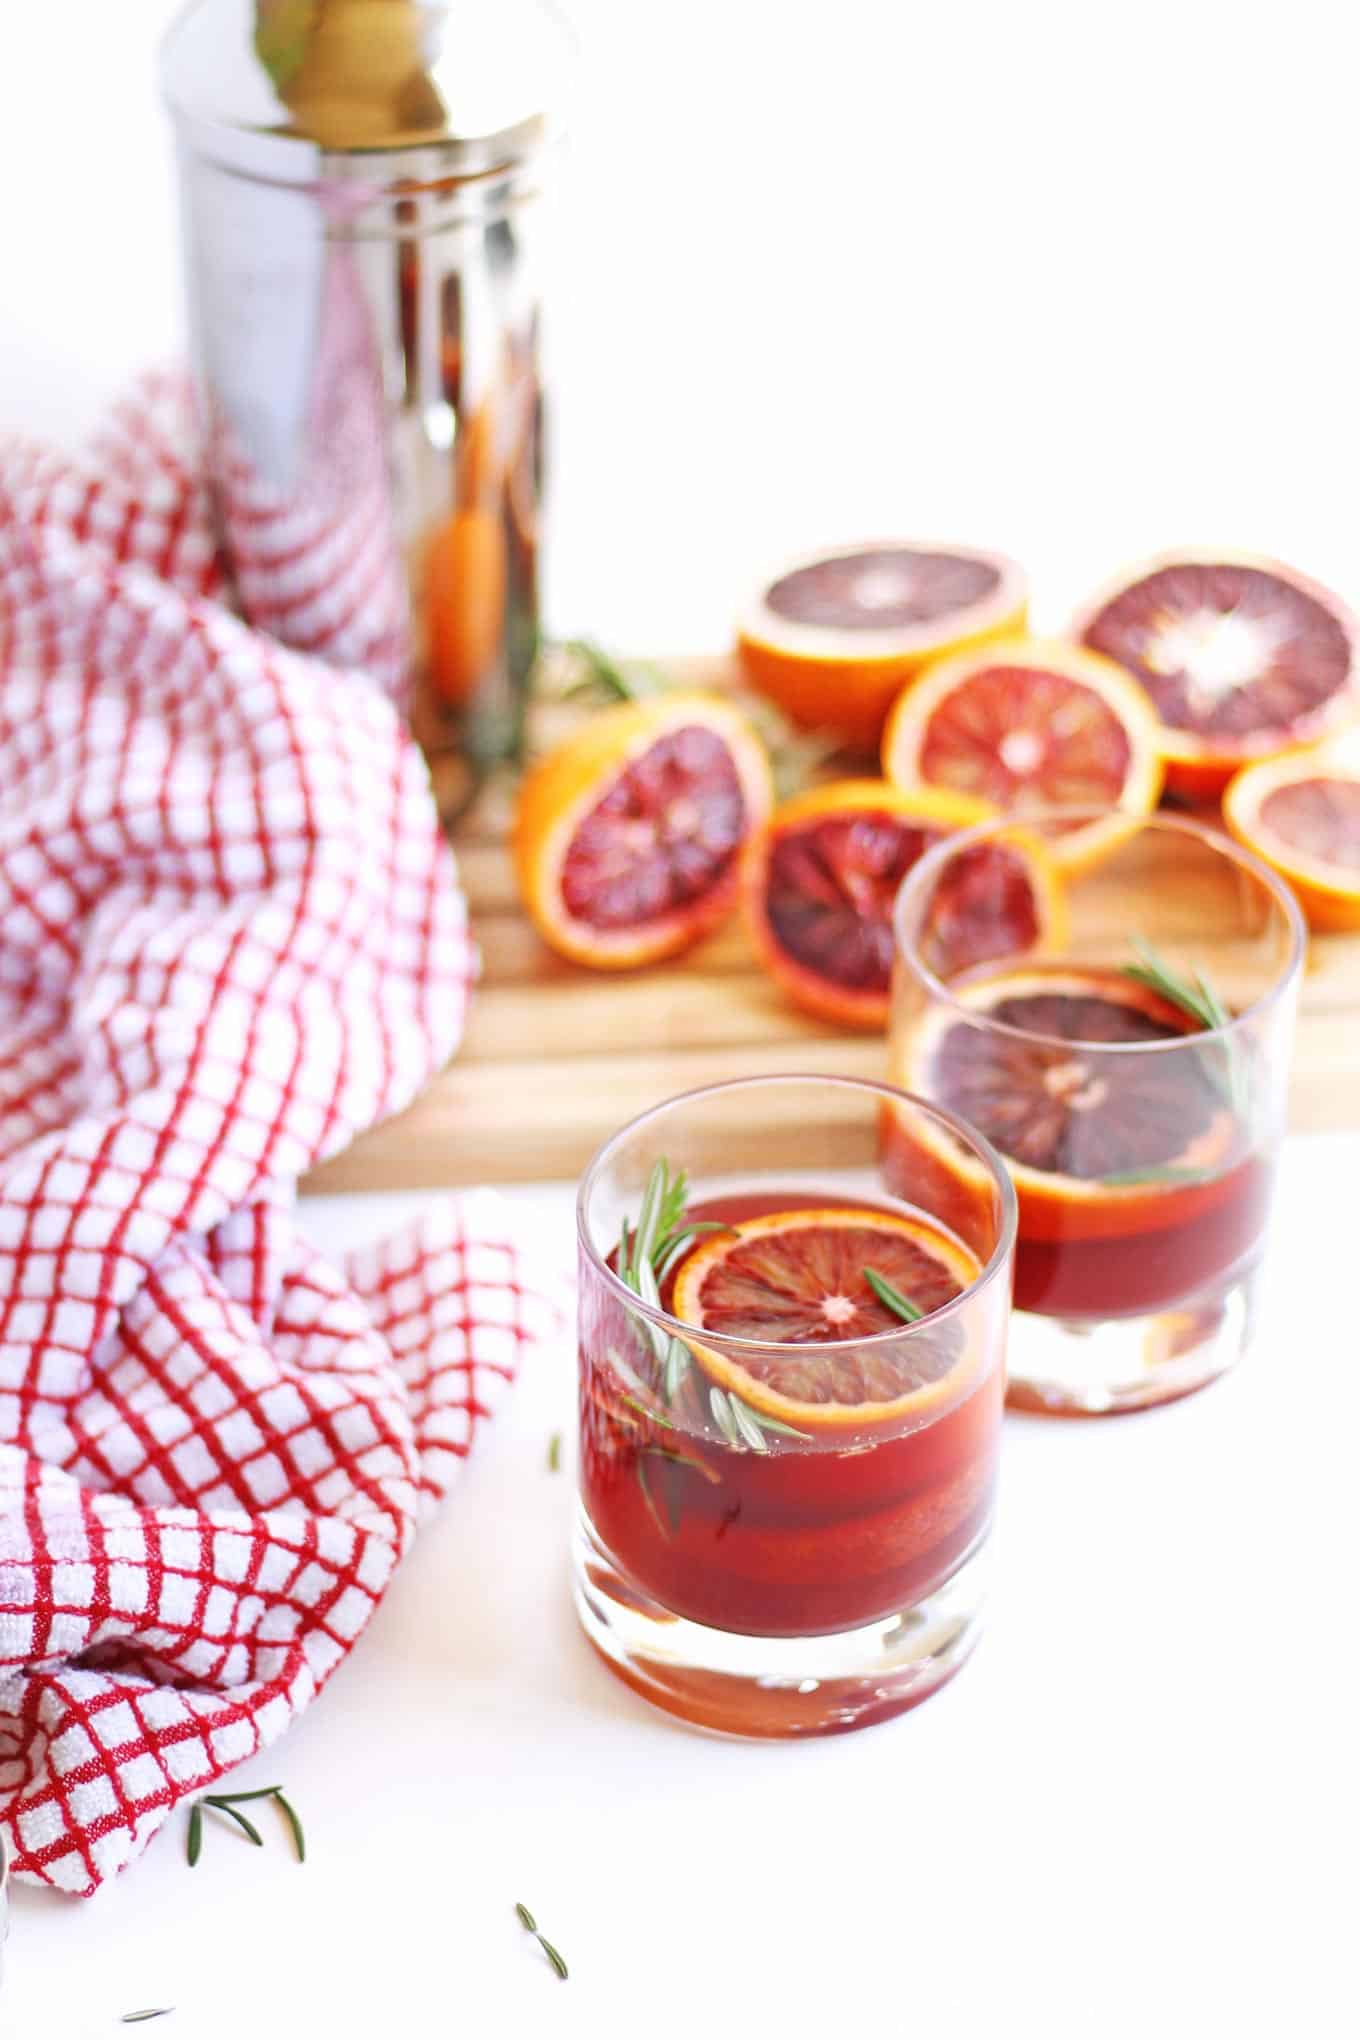 A picture of a blood orange cocktail with a sprig of rosemary and squeezed oranges in the background